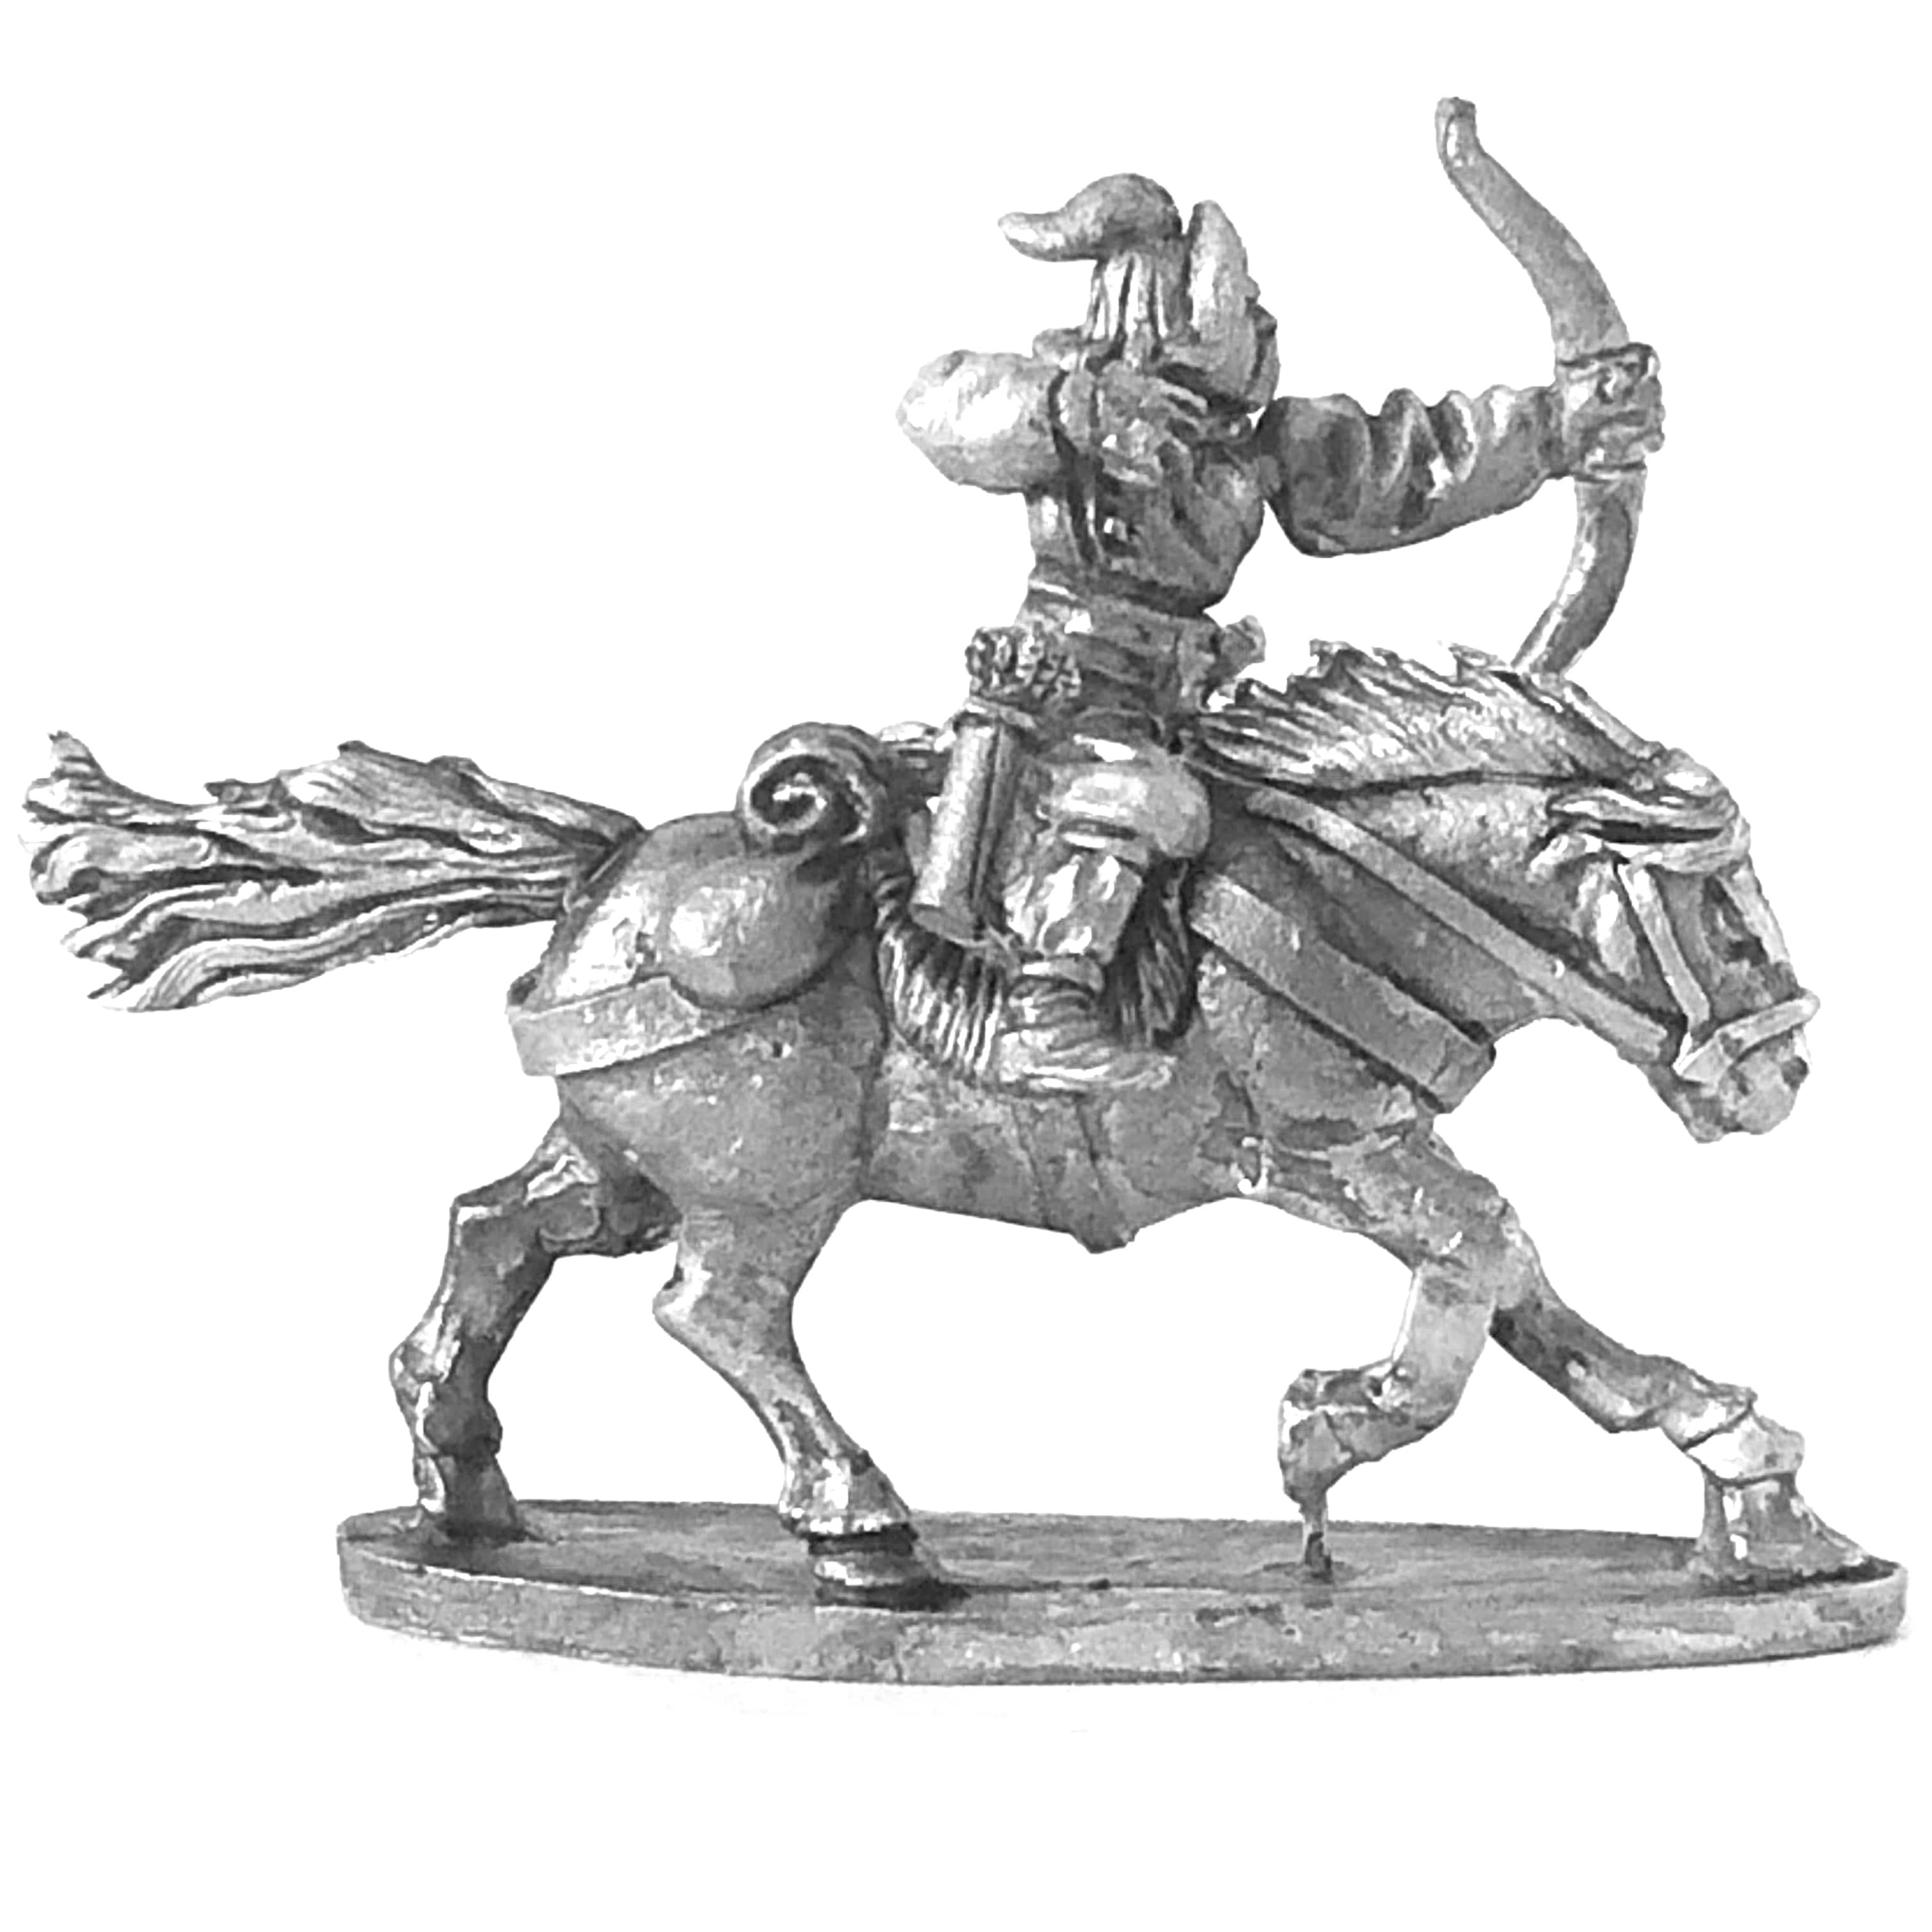 Mounted Archer